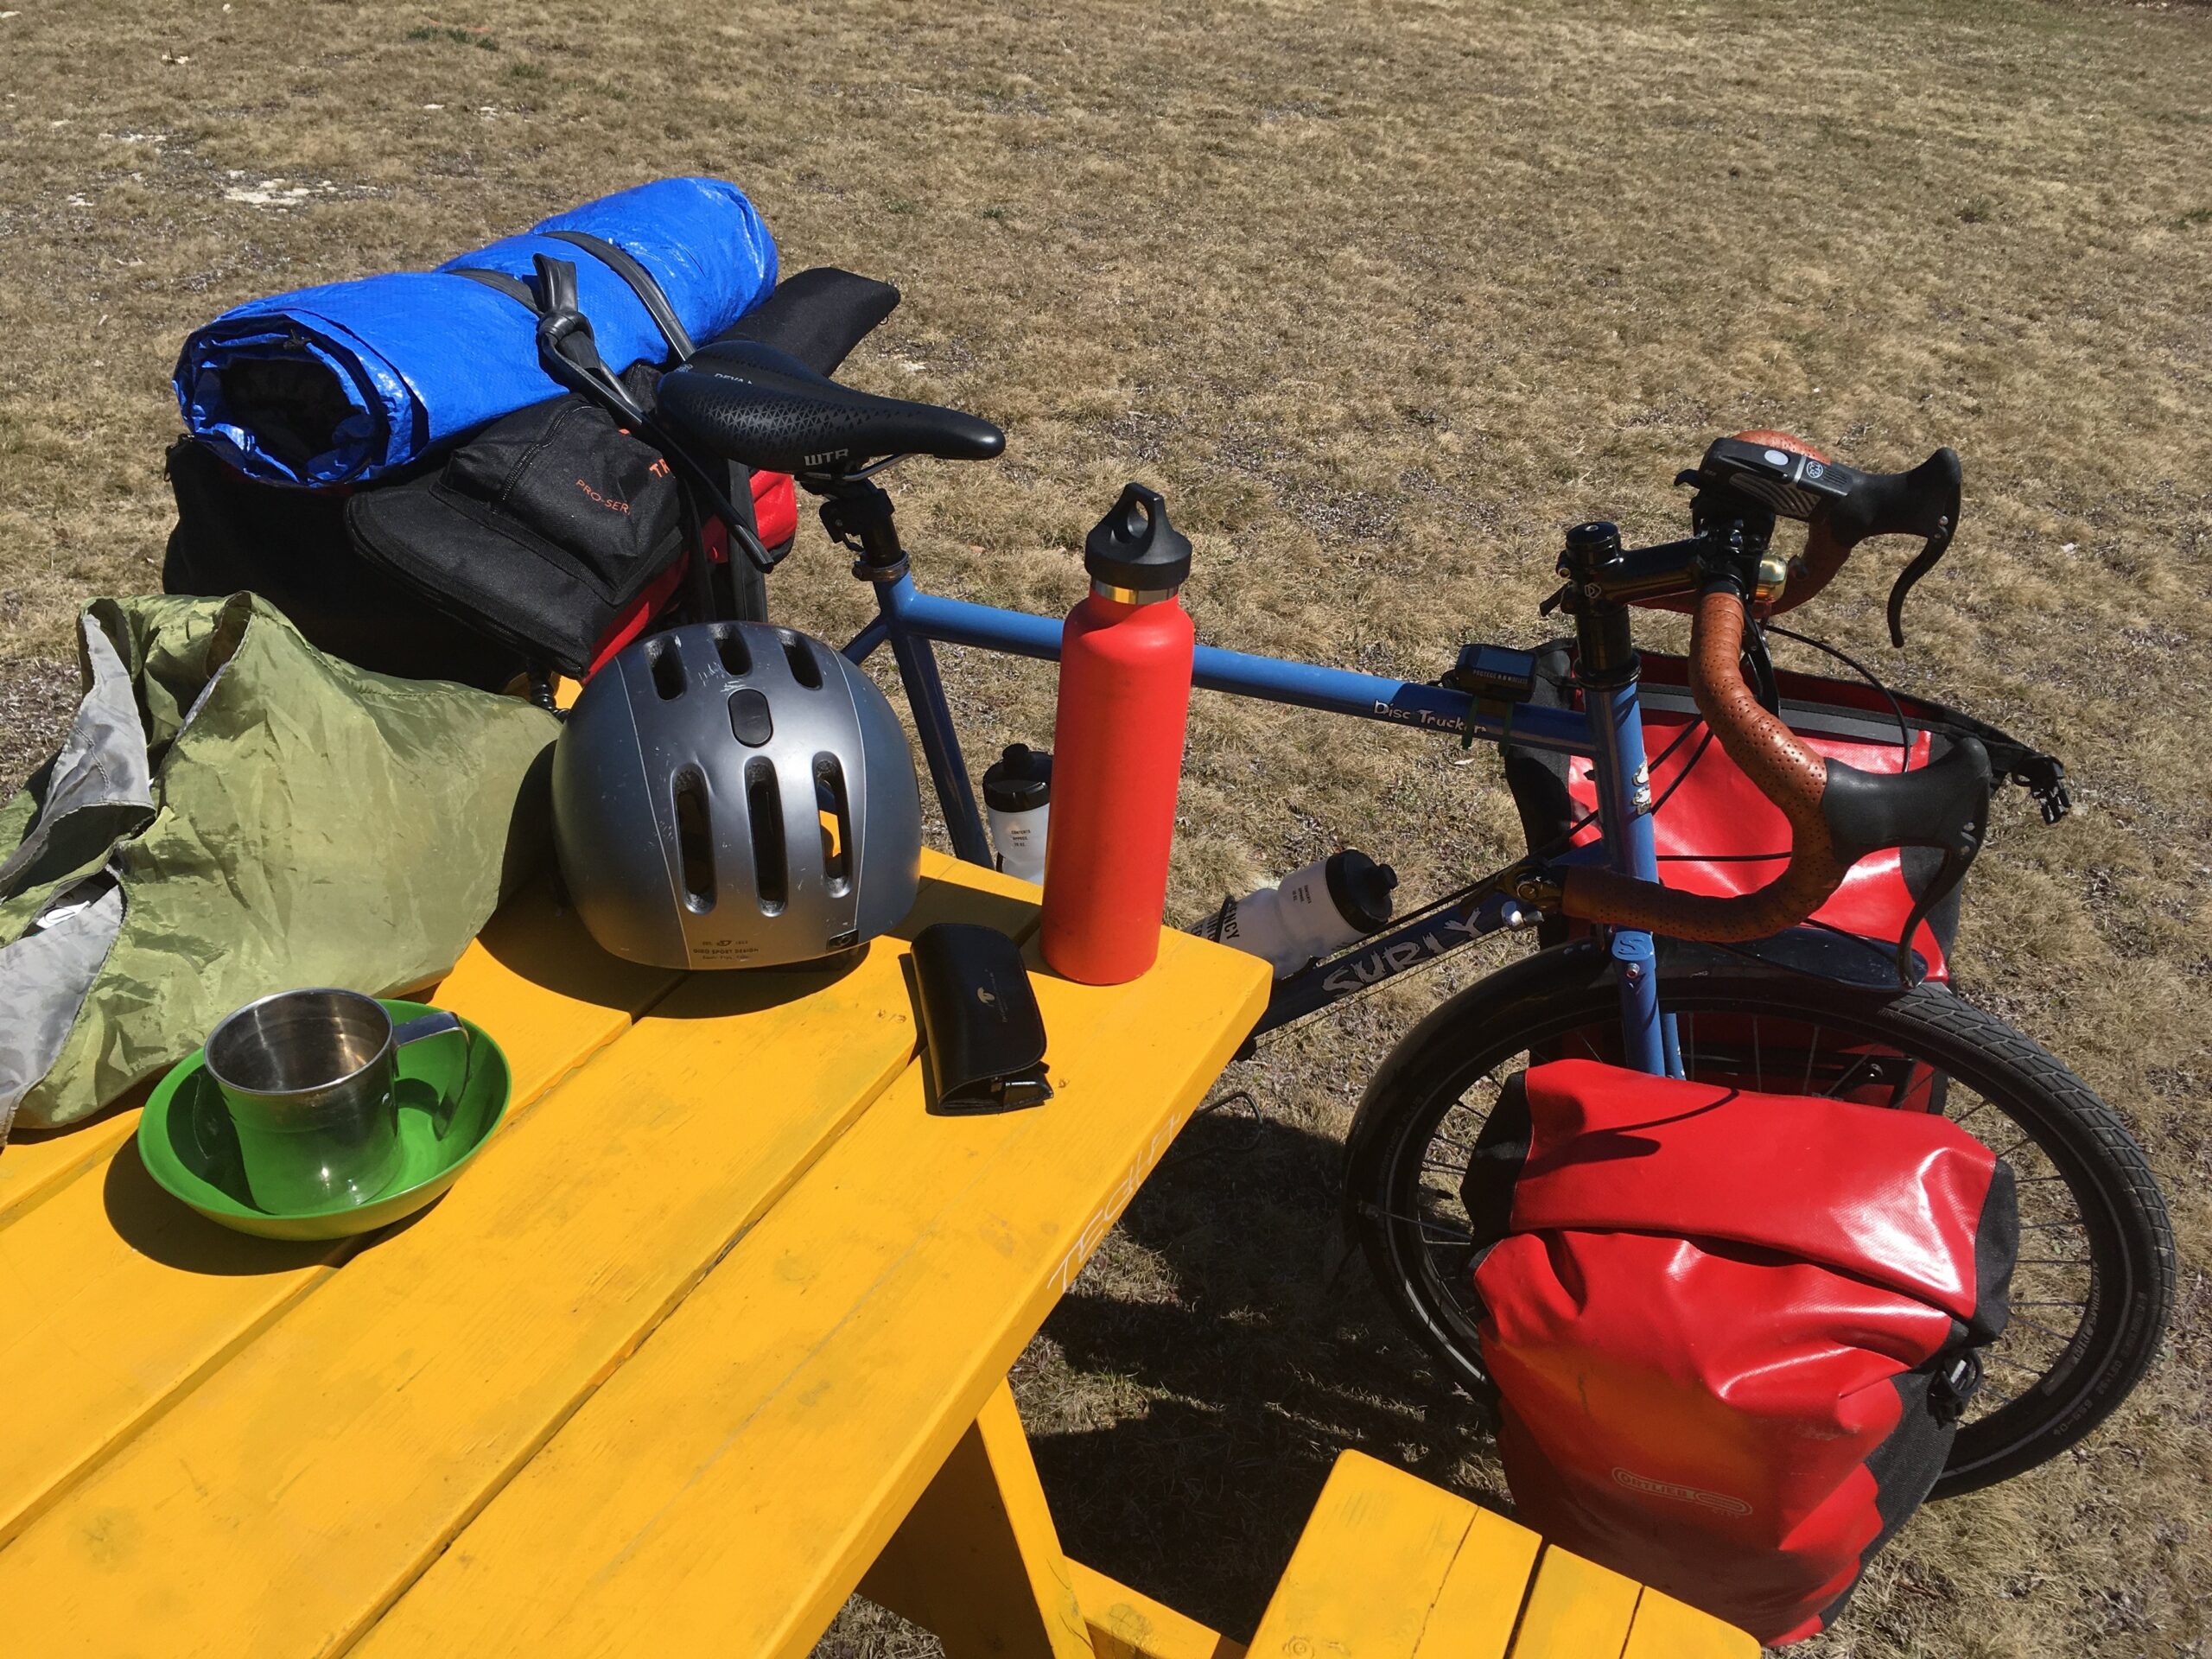 A blue bike with red panniers next to a yellow picnic table.